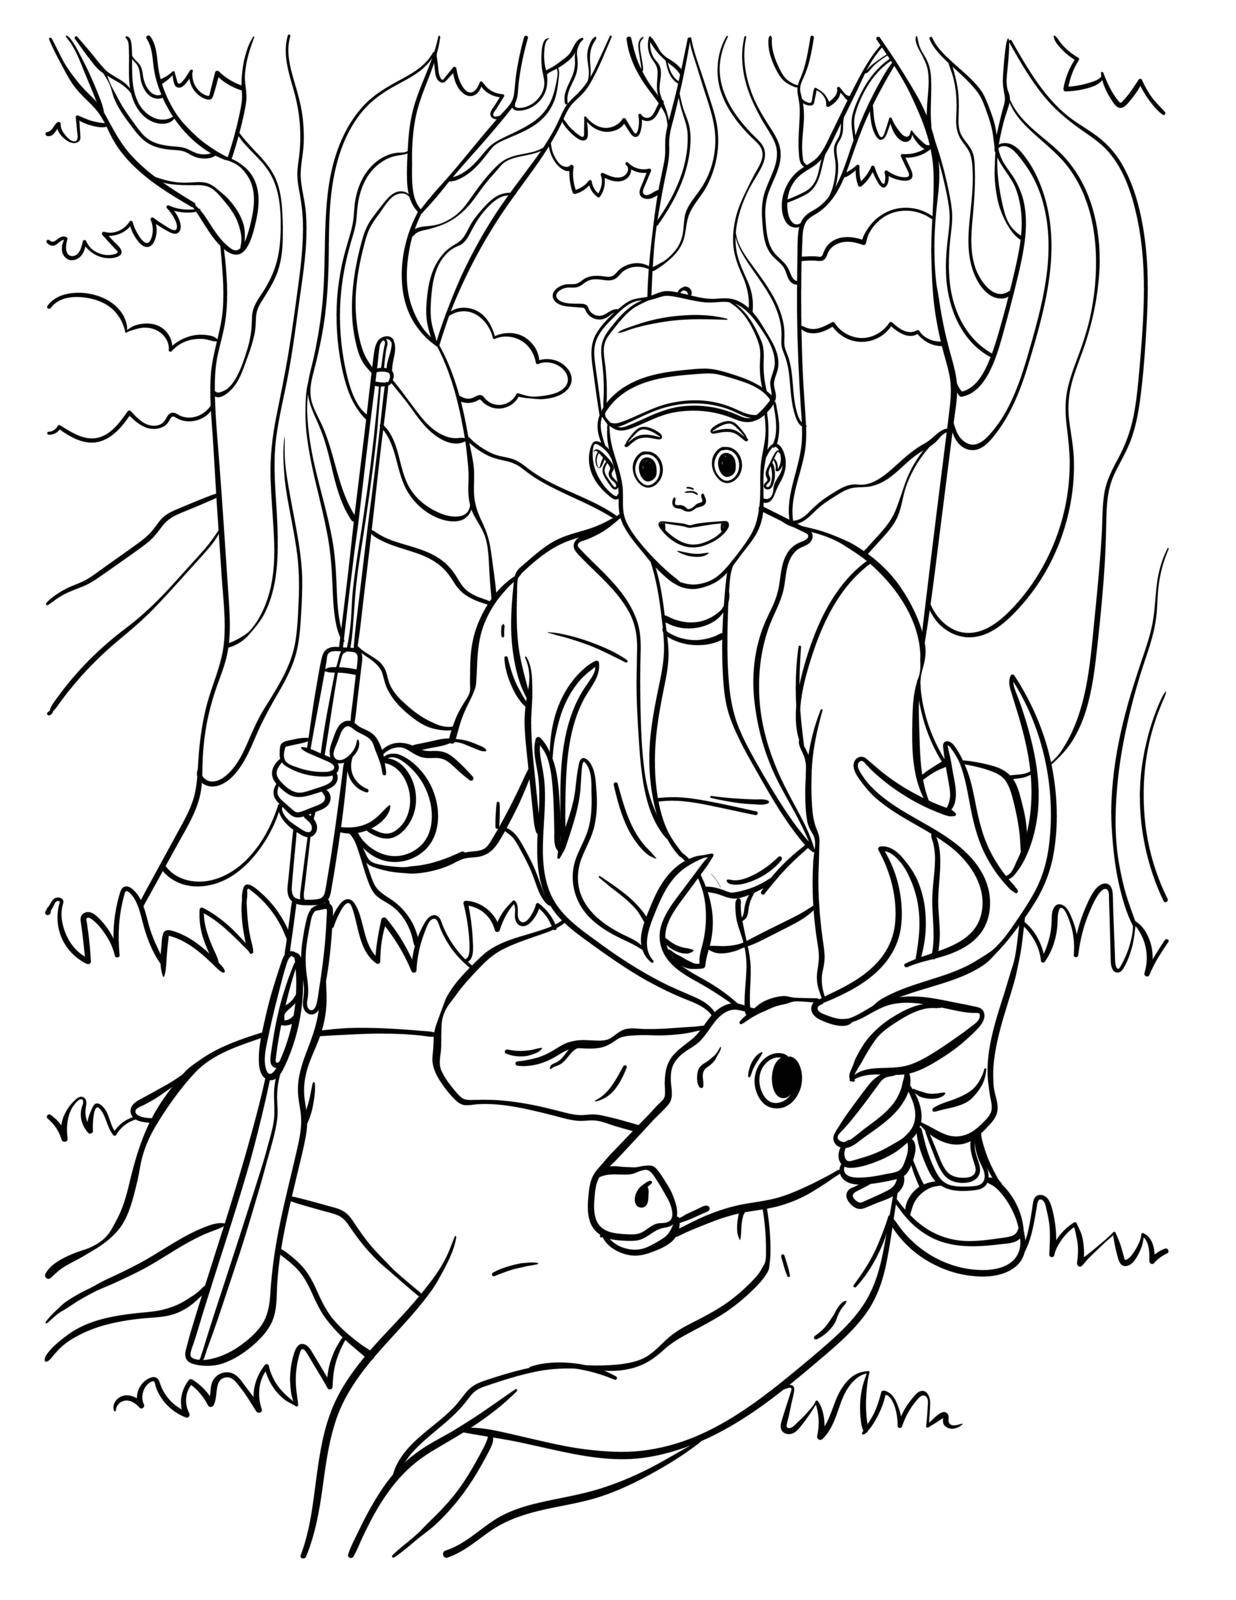 Deer Hunting Coloring Page for Kids by abbydesign